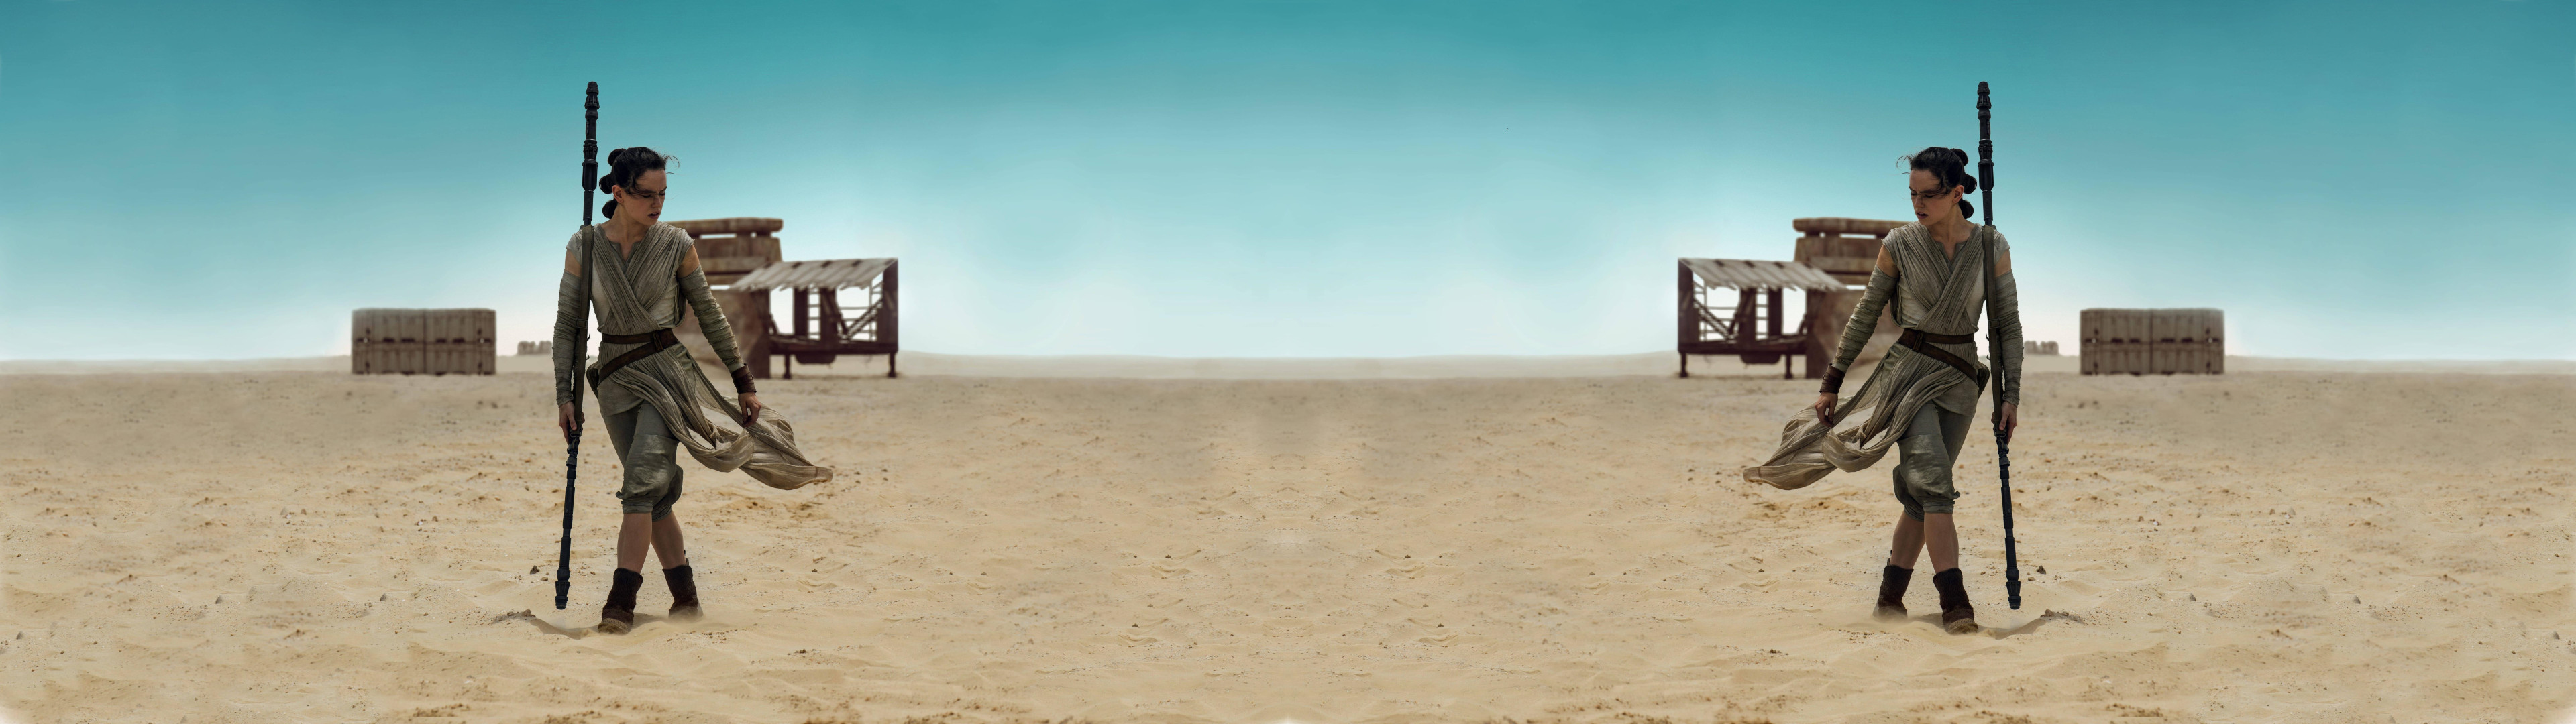 3840x1080 [] Simple Rey & Reflection